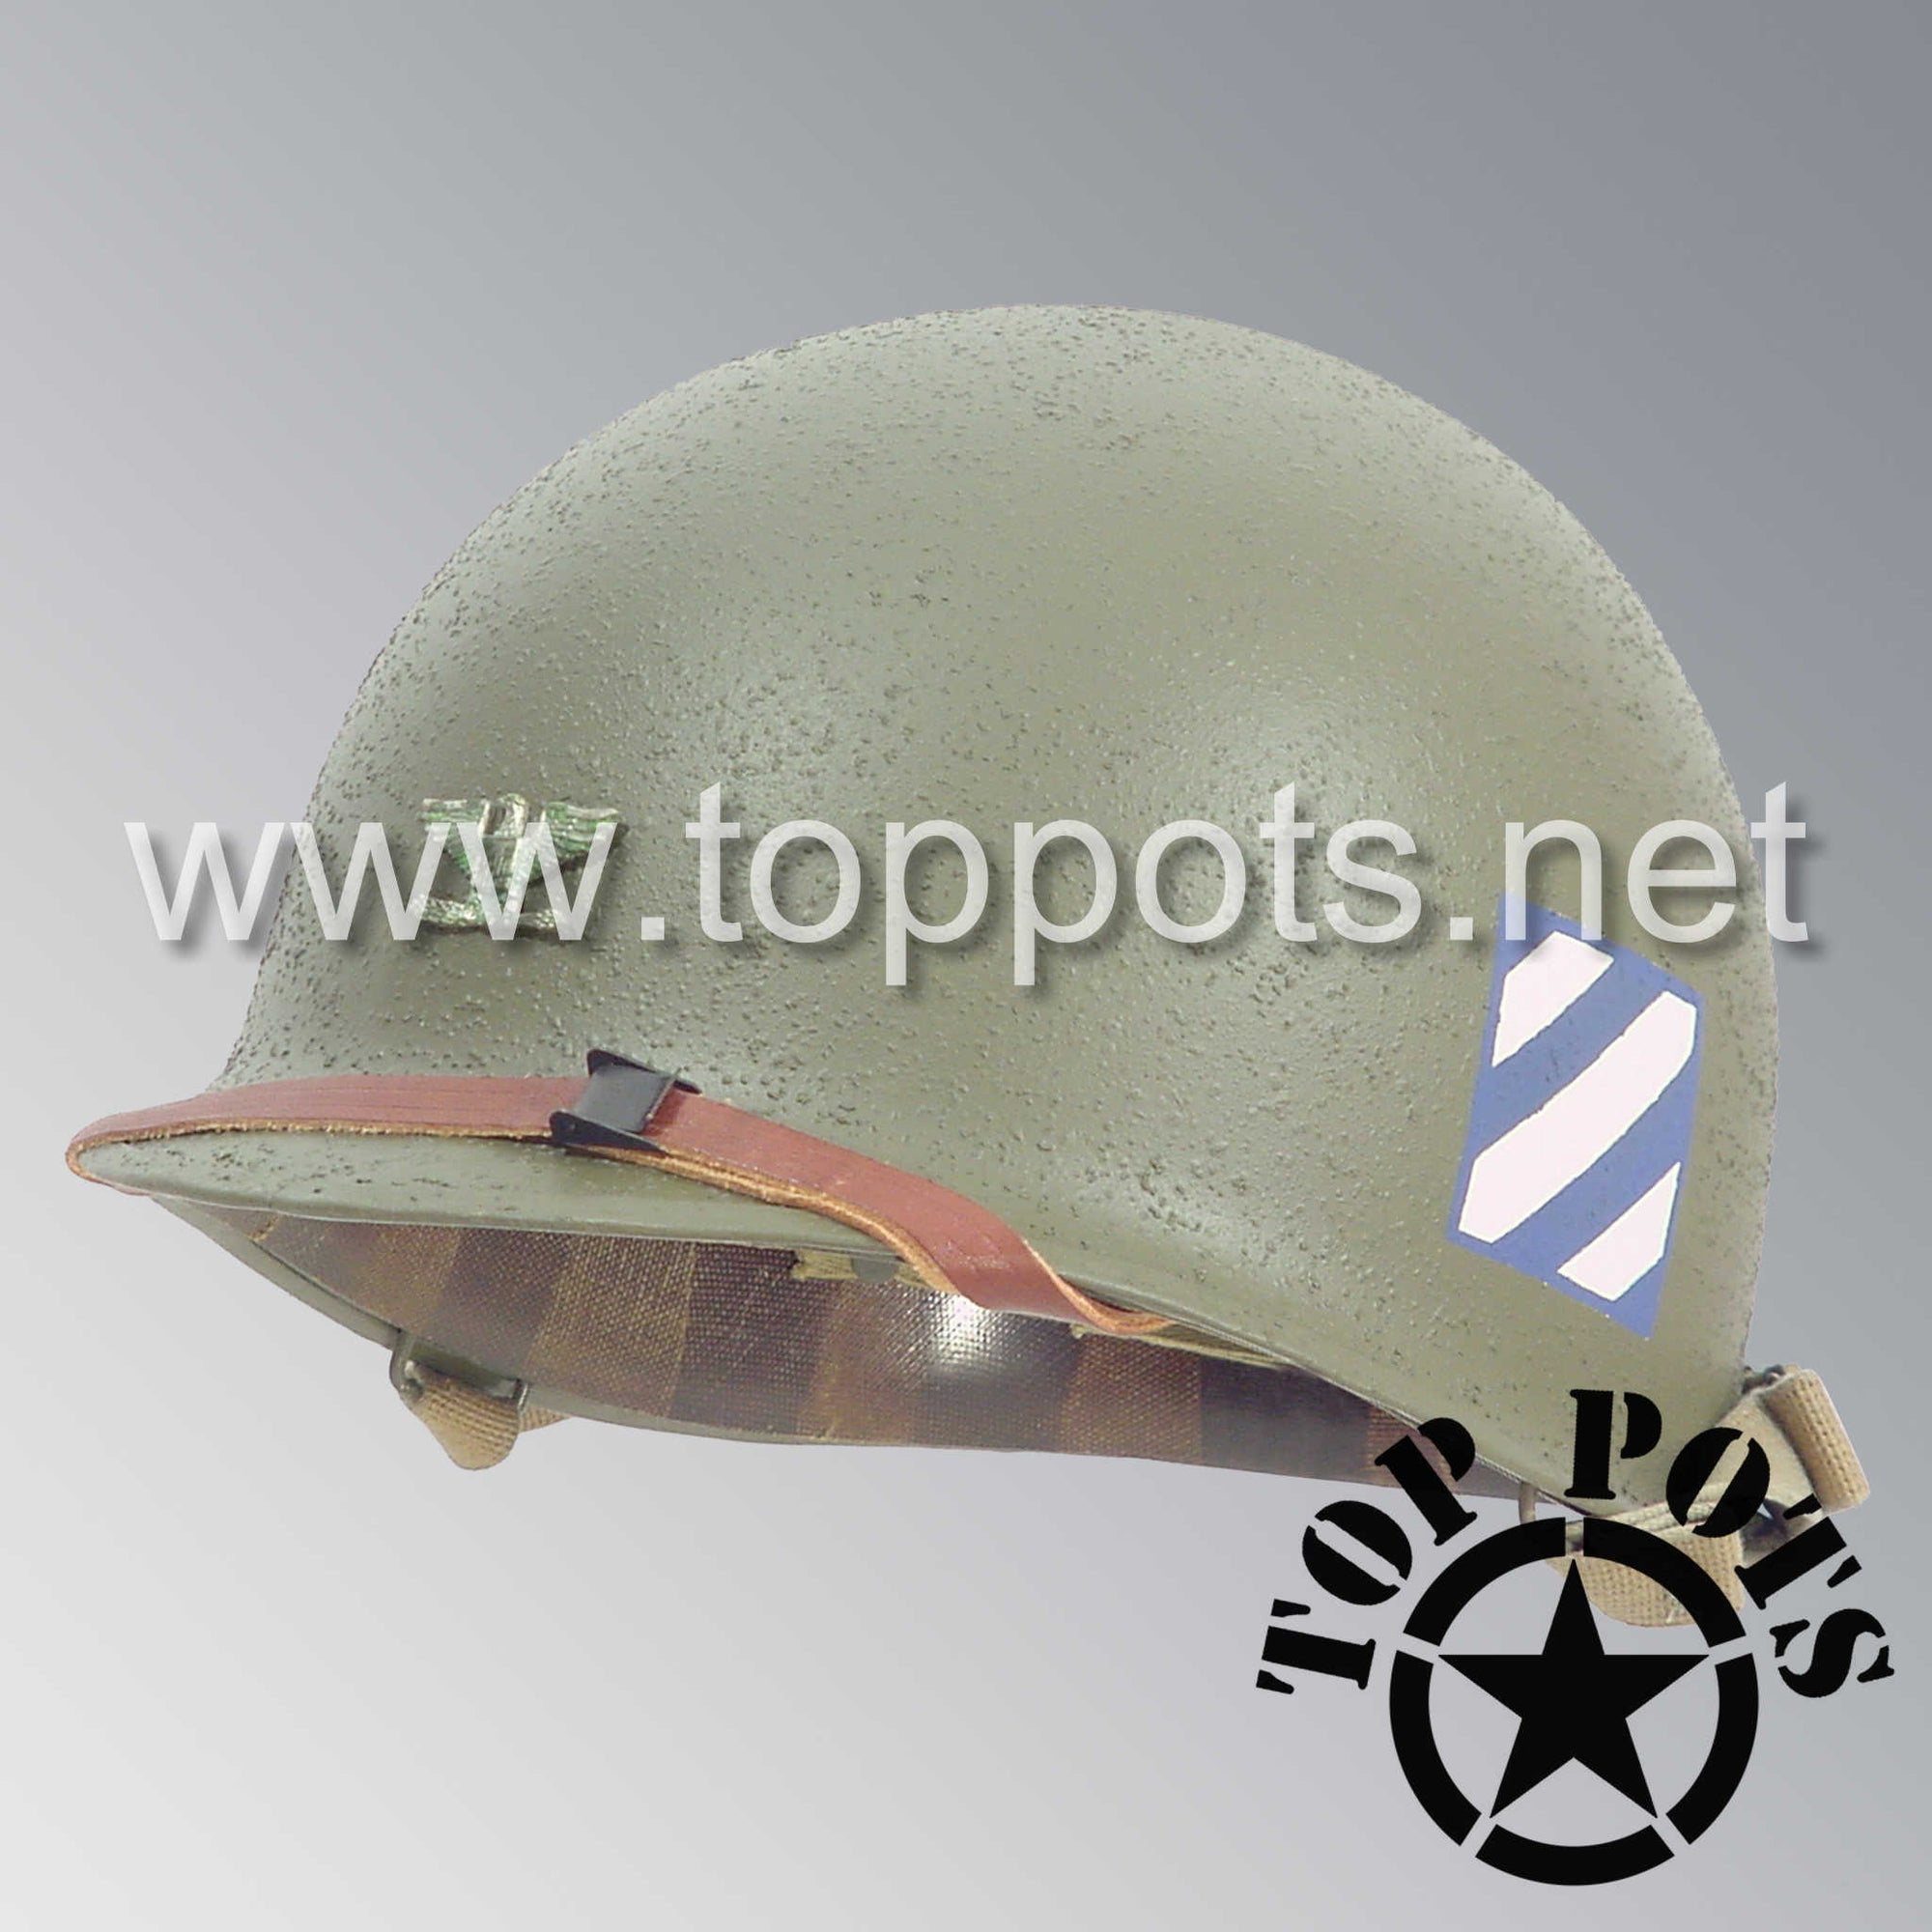 WWII US Army Restored Original M1 Infantry Helmet Swivel Bale Shell and Liner with 3rd Infantry Division Officer Colonel Metal Rank and Emblem